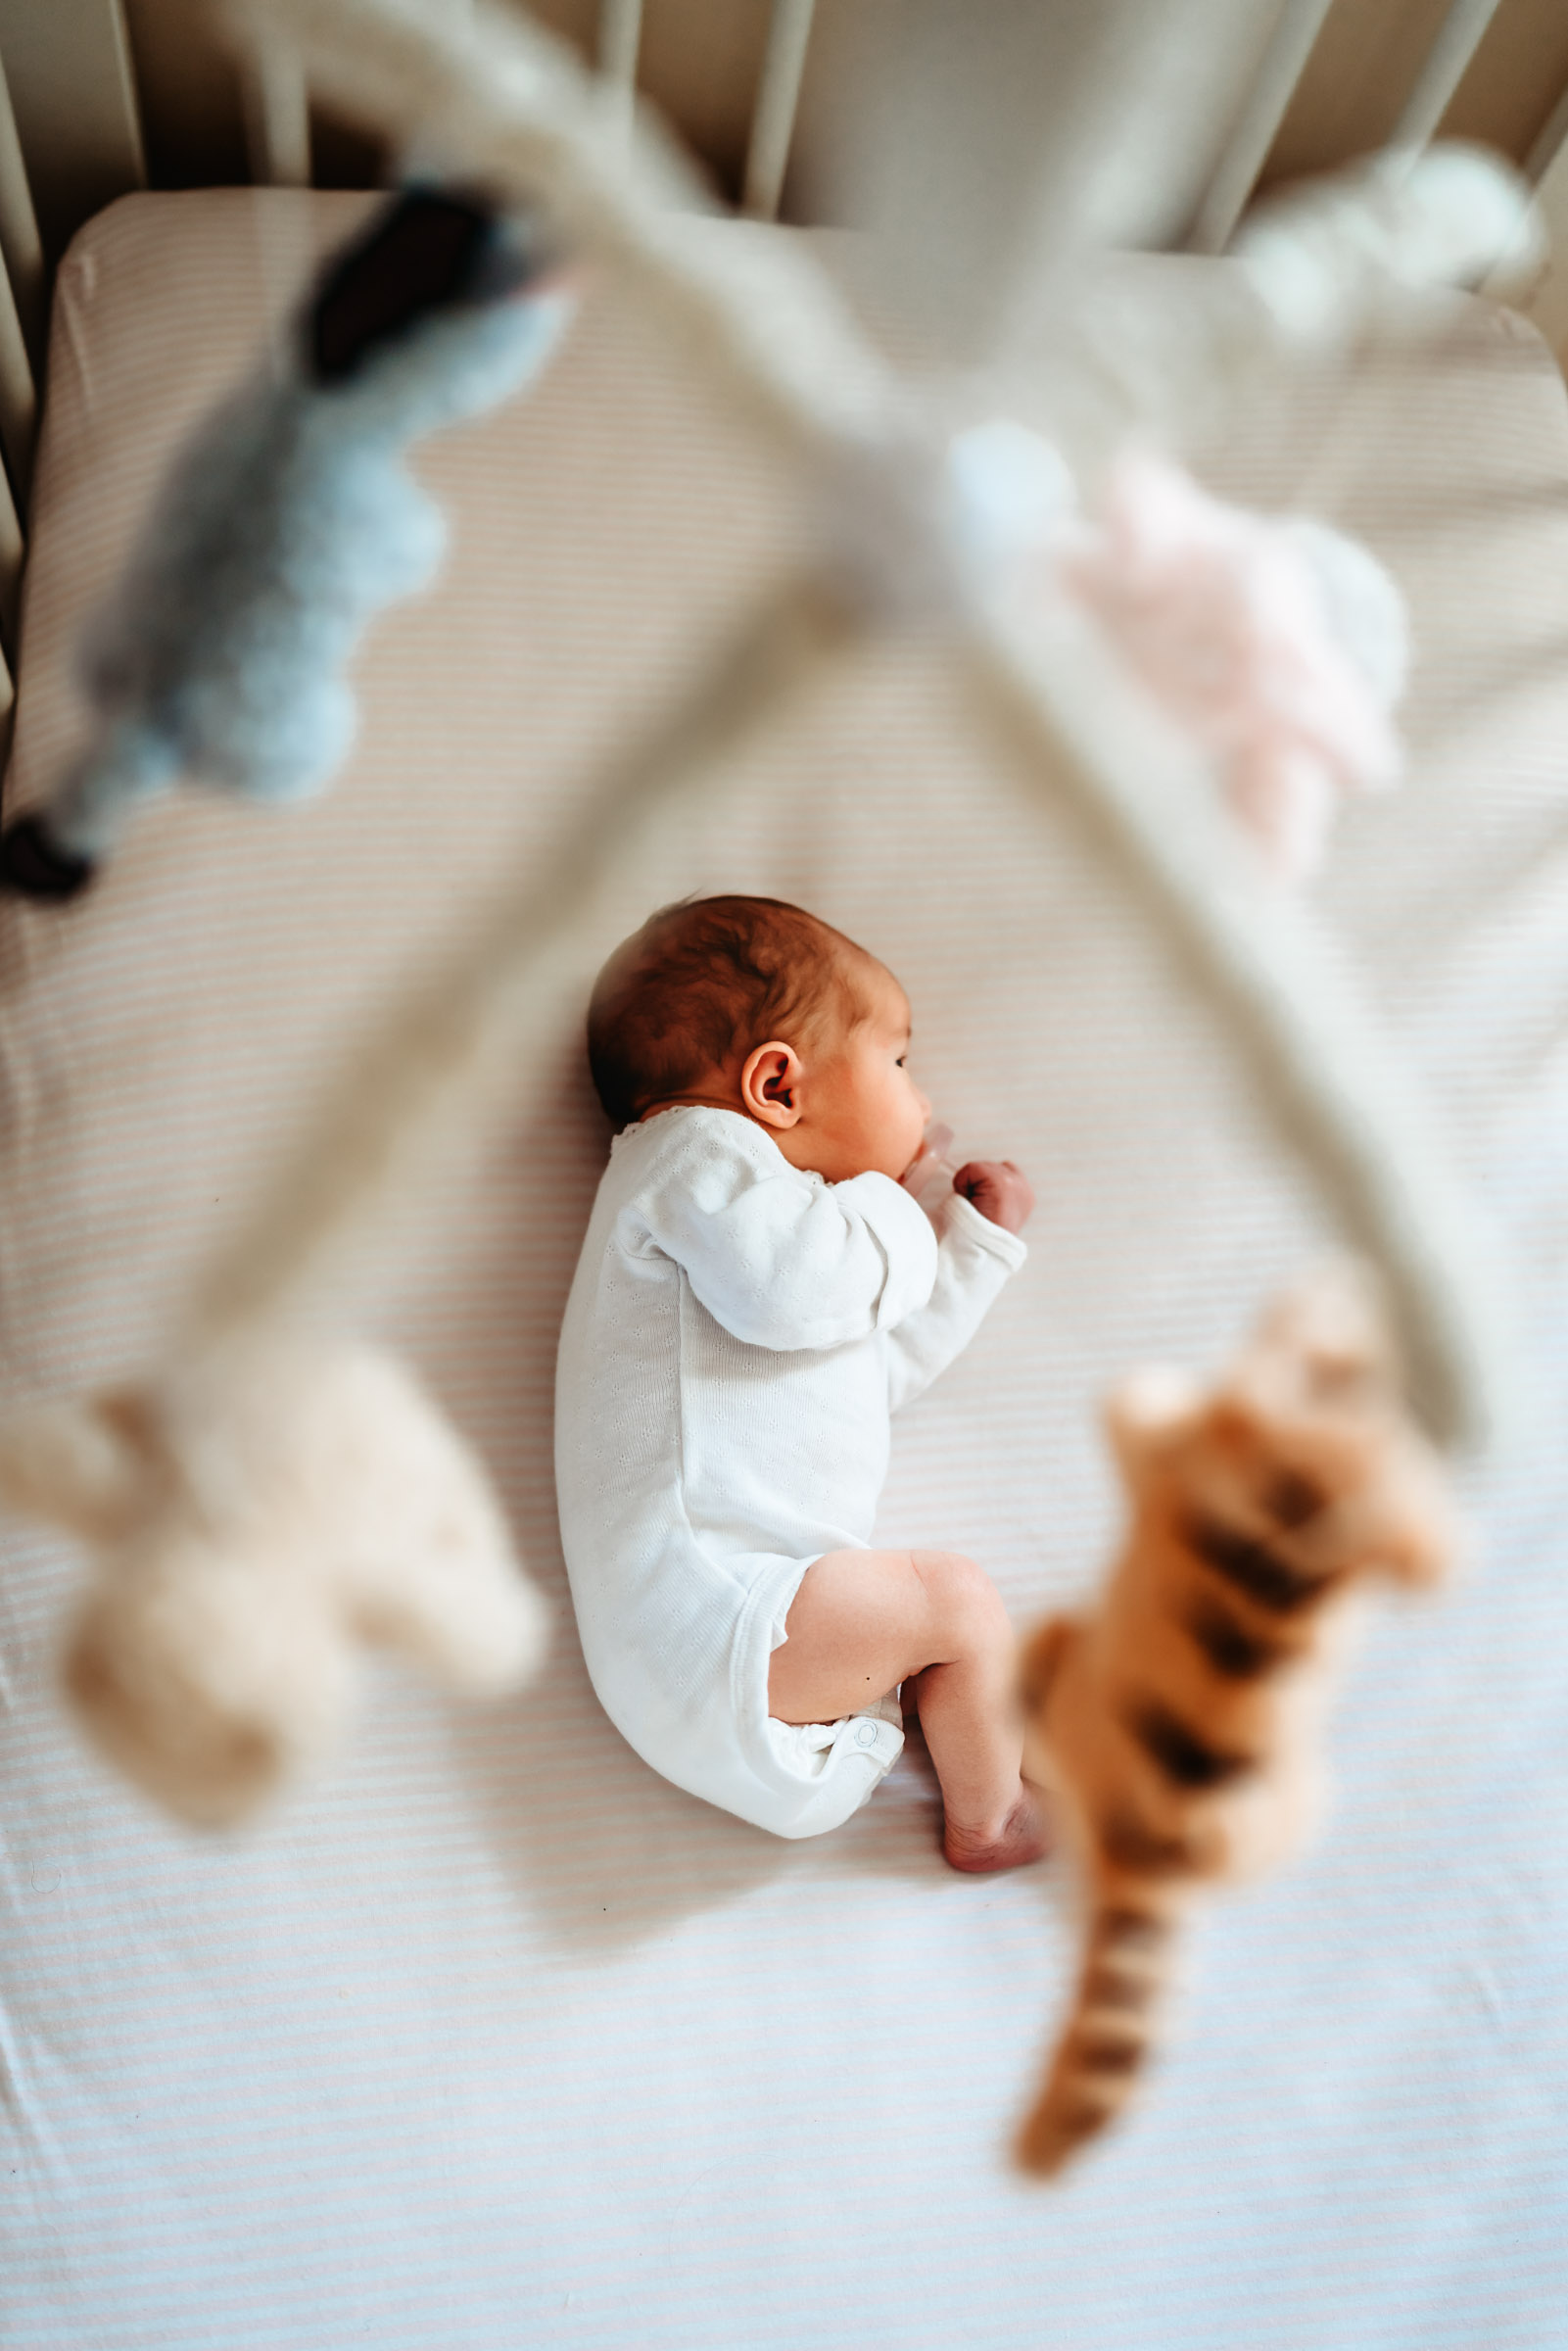 Looking down at a newborn baby wearing a white onesie and laying in her crib during a San Diego in-home lifestyle newborn session by Love Michelle Photography